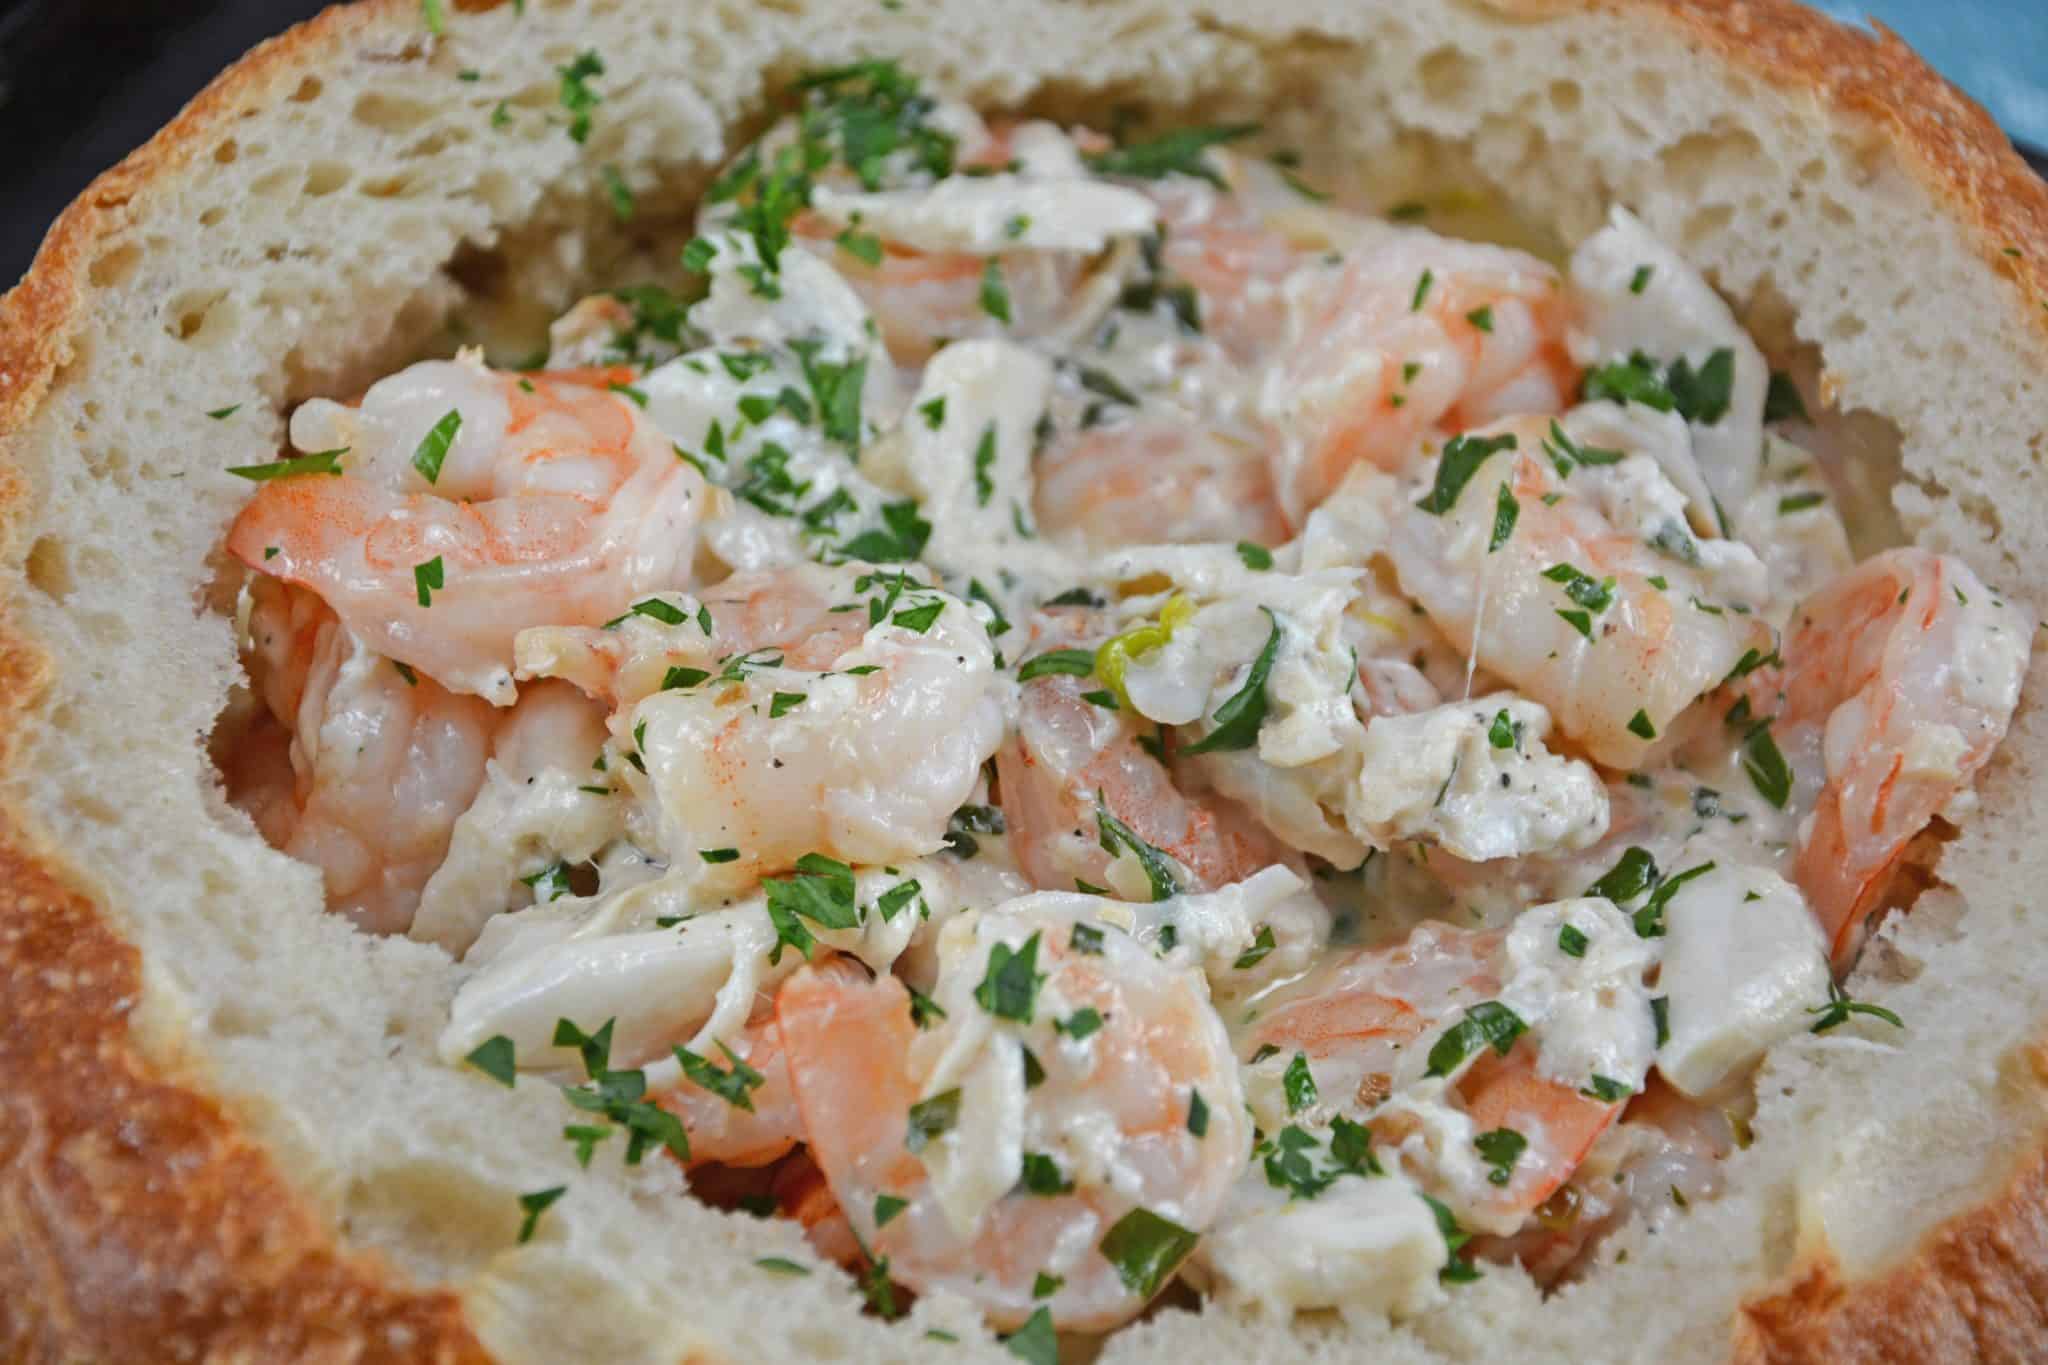 Creamy Shrimp Scampi Bread Bowl can be an easy appetizer or entree, dipping bread in the rich scampi sauce with succulent shrimp.